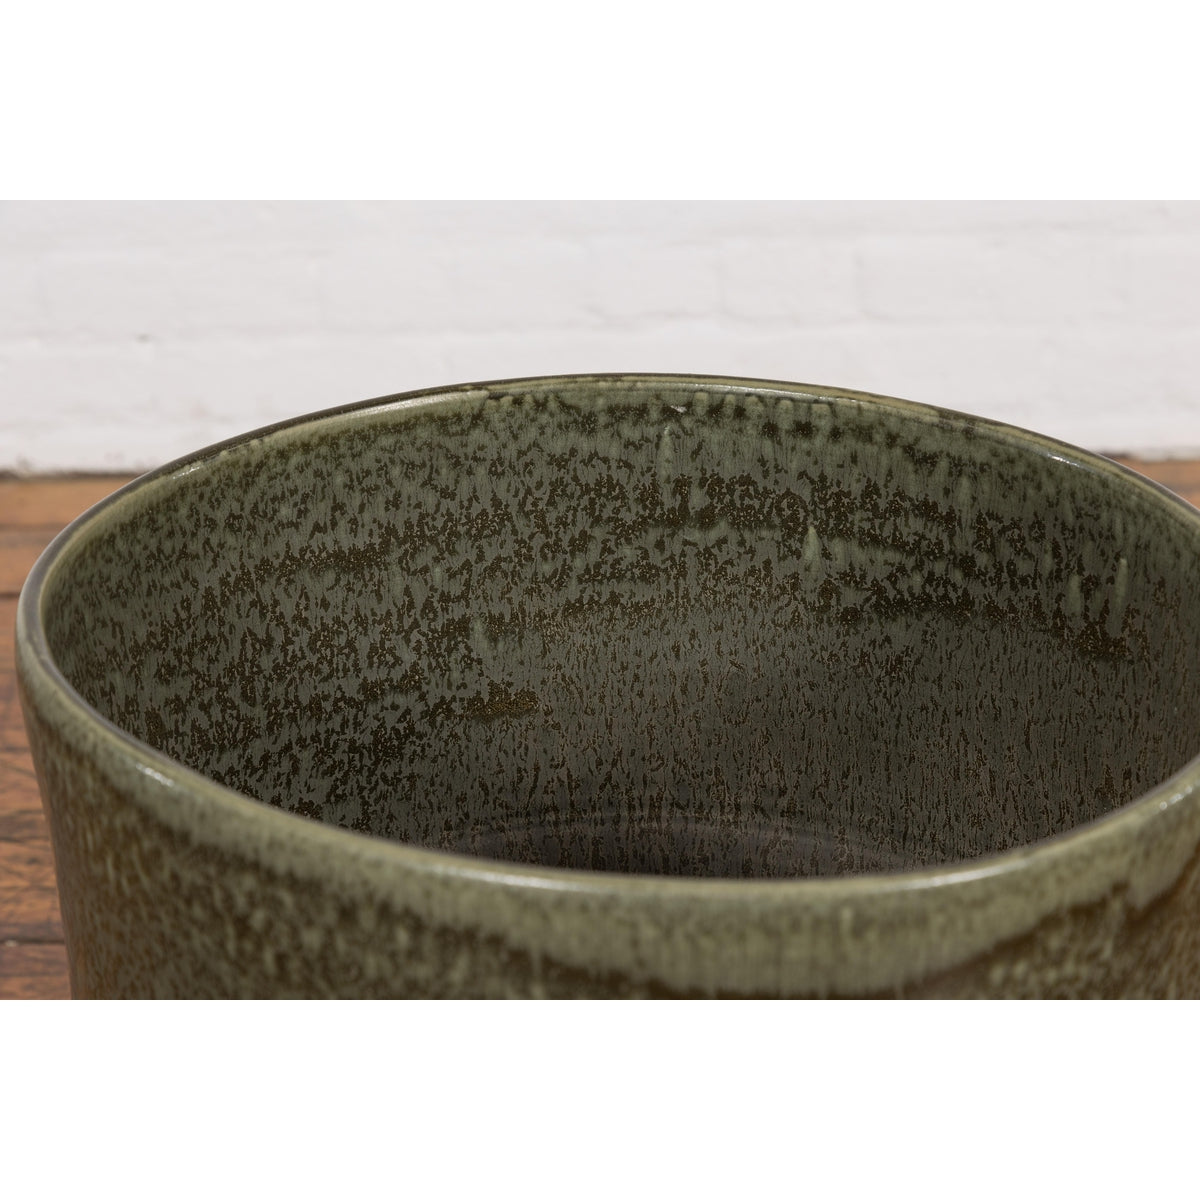 Large Green Glazed Planter with Oval Shaped Opening-YNE836-10. Asian & Chinese Furniture, Art, Antiques, Vintage Home Décor for sale at FEA Home